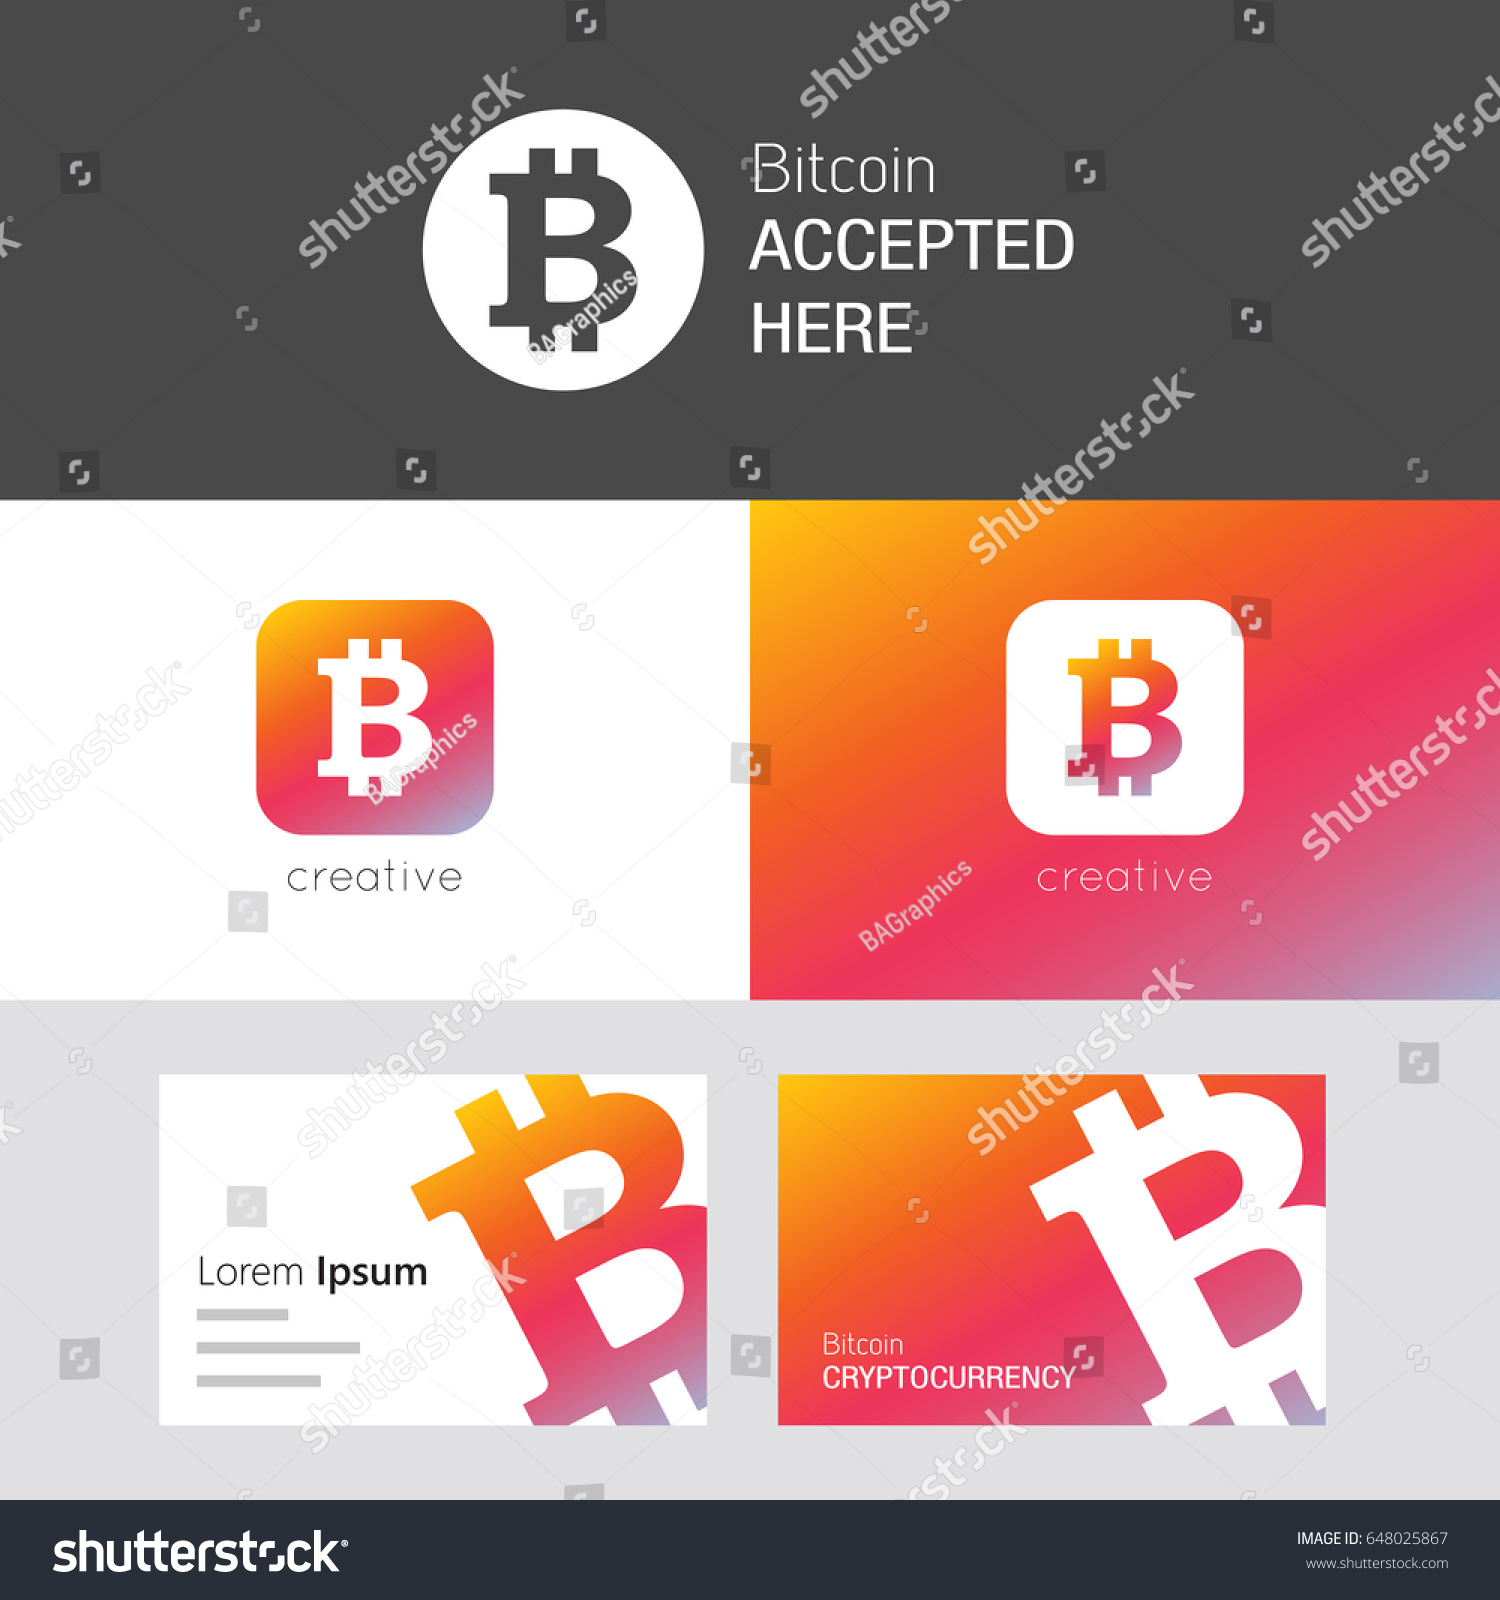 SVG of Bitcoin vector set. Useful as brand logo, app icon or business card. Compatible with PNG, AI, CDR, JPG, SVG, PDF, ICO or EPS formats. svg